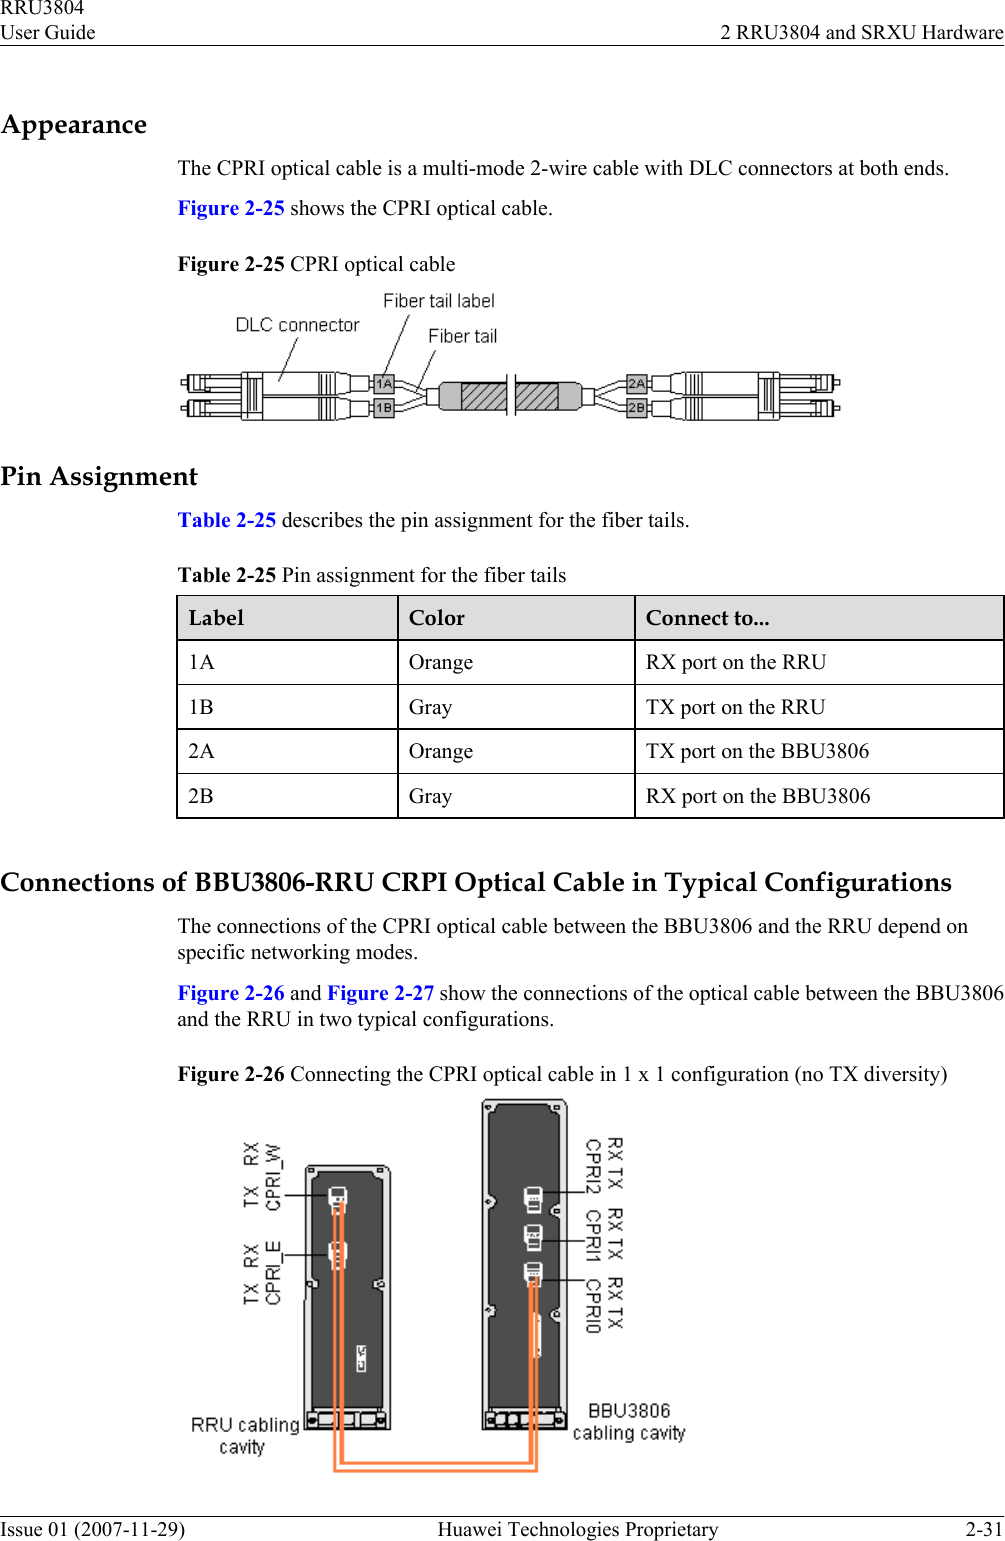 AppearanceThe CPRI optical cable is a multi-mode 2-wire cable with DLC connectors at both ends.Figure 2-25 shows the CPRI optical cable.Figure 2-25 CPRI optical cablePin AssignmentTable 2-25 describes the pin assignment for the fiber tails.Table 2-25 Pin assignment for the fiber tailsLabel Color Connect to...1A Orange RX port on the RRU1B Gray TX port on the RRU2A Orange TX port on the BBU38062B Gray RX port on the BBU3806 Connections of BBU3806-RRU CRPI Optical Cable in Typical ConfigurationsThe connections of the CPRI optical cable between the BBU3806 and the RRU depend onspecific networking modes.Figure 2-26 and Figure 2-27 show the connections of the optical cable between the BBU3806and the RRU in two typical configurations.Figure 2-26 Connecting the CPRI optical cable in 1 x 1 configuration (no TX diversity)RRU3804User Guide 2 RRU3804 and SRXU HardwareIssue 01 (2007-11-29)  Huawei Technologies Proprietary 2-31